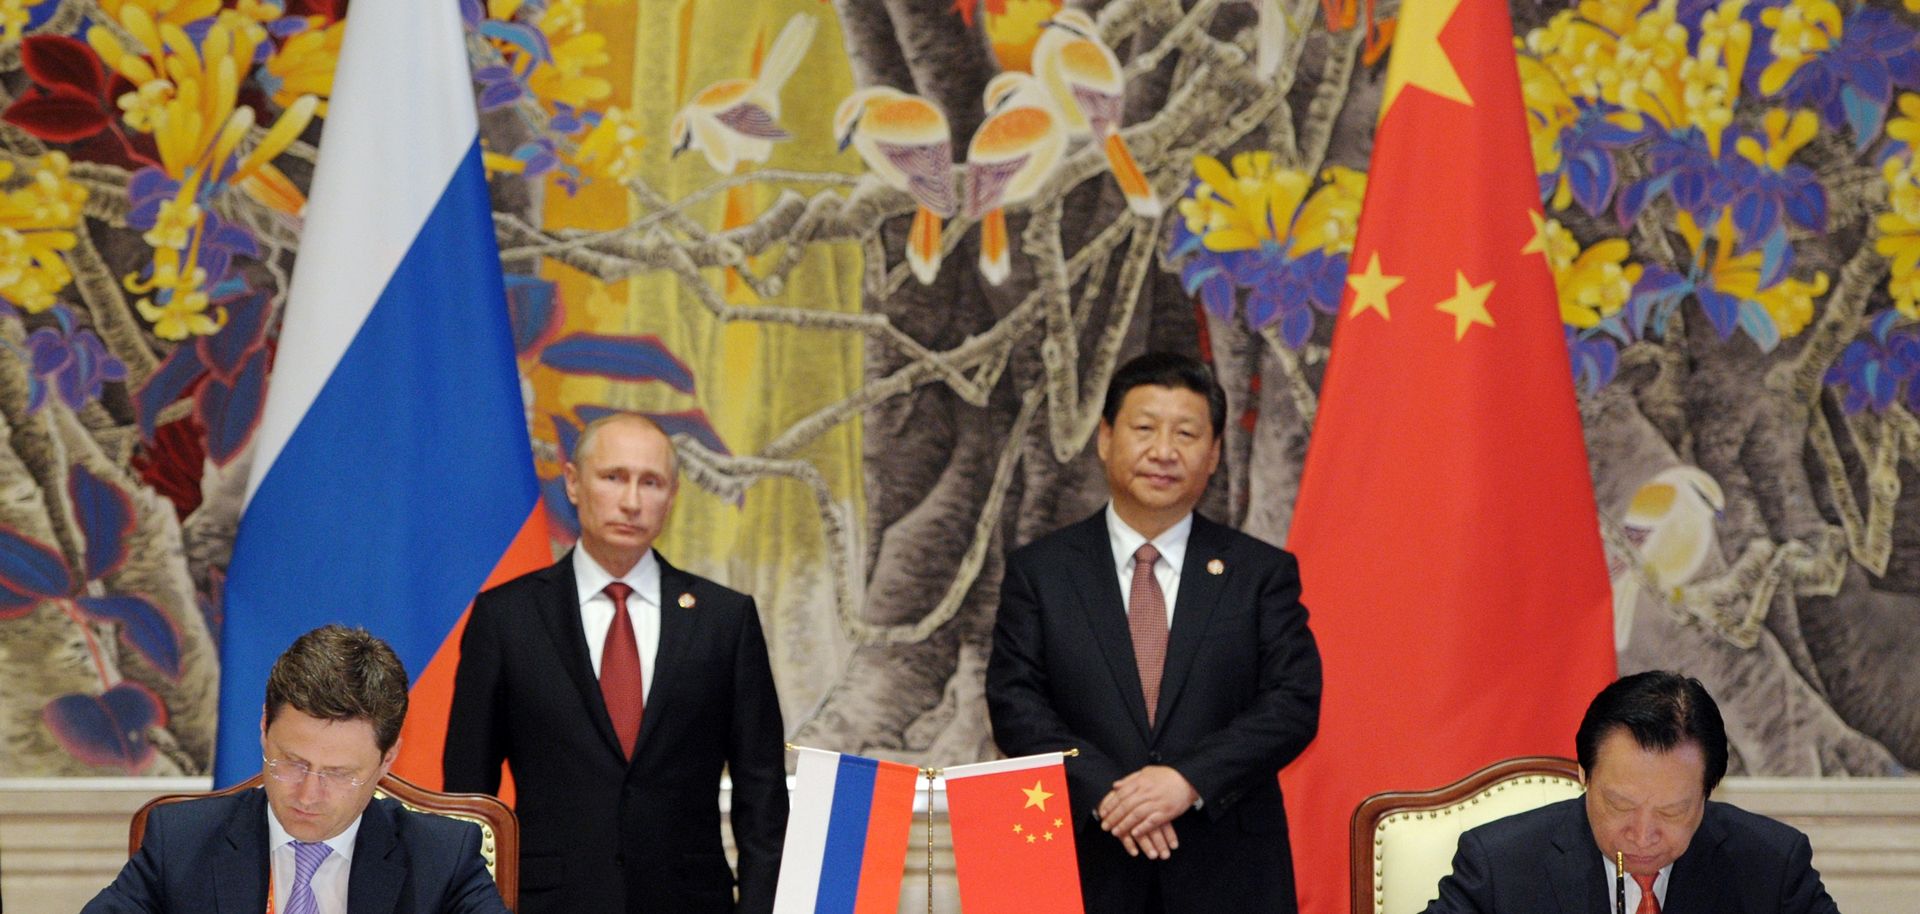 A Chronology of Russia's Rekindled Alliance With China